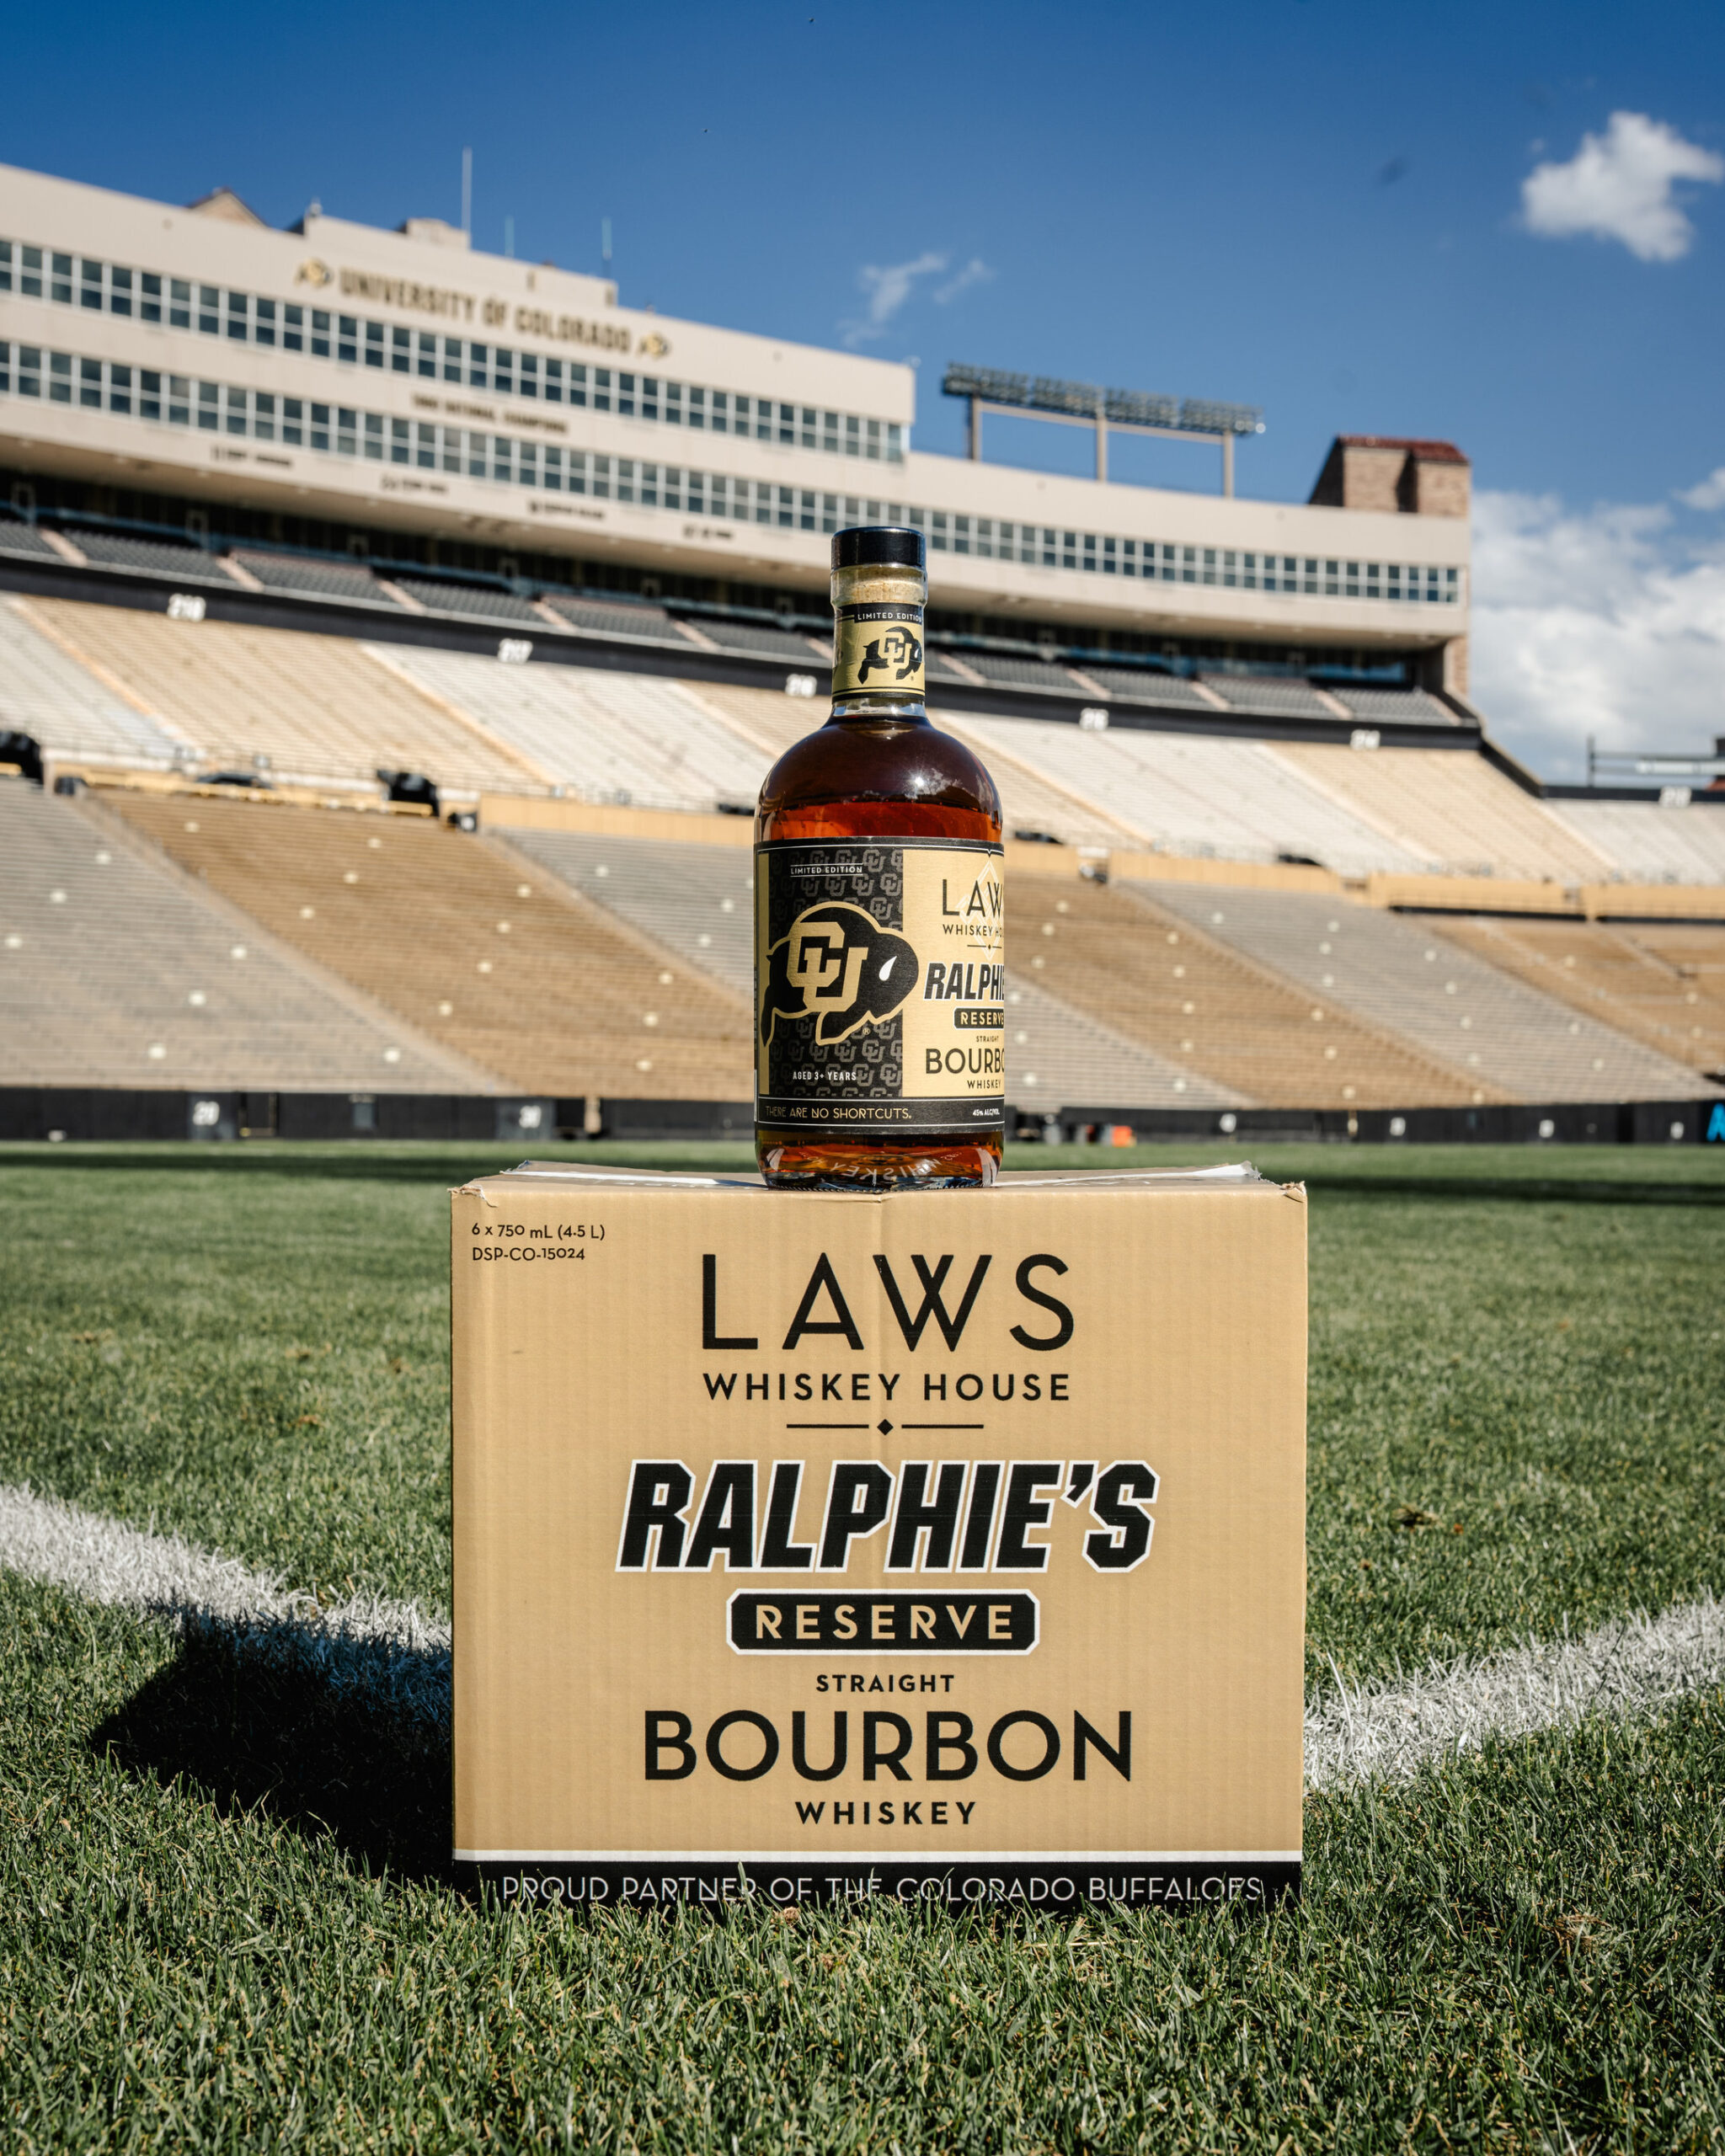 Laws Whiskey is the New Official Whiskey of  the University of Colorado Buffaloes